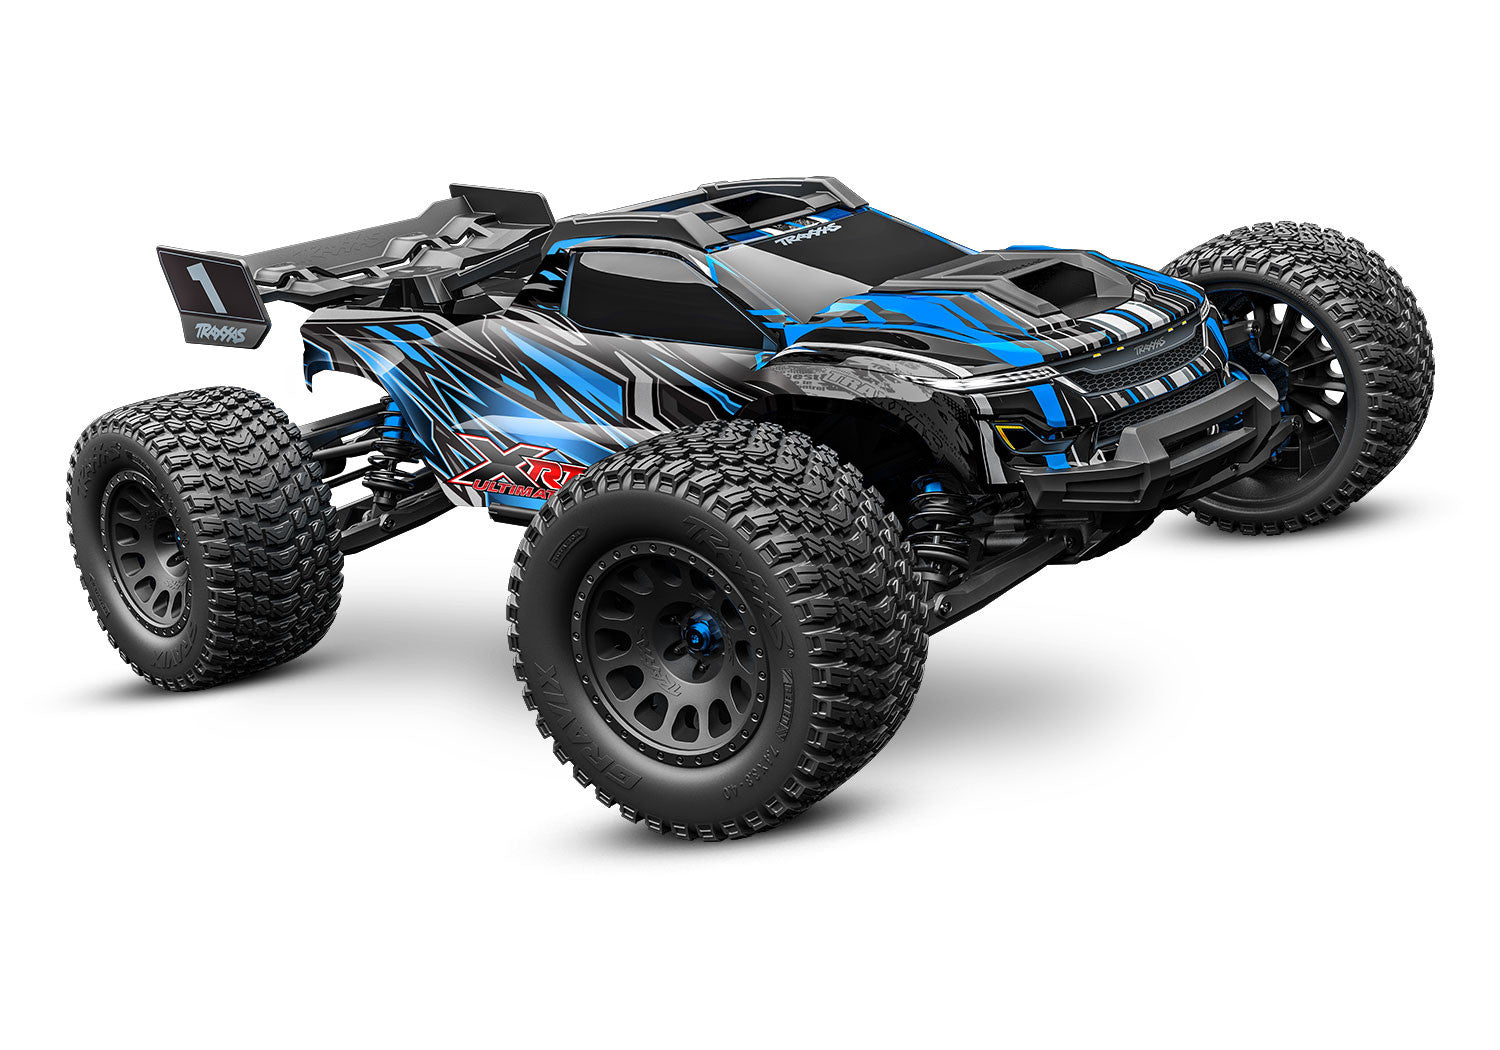 Voitures Mini MHD Stinger BL Monster Buggy Truggy 4WD 1/16